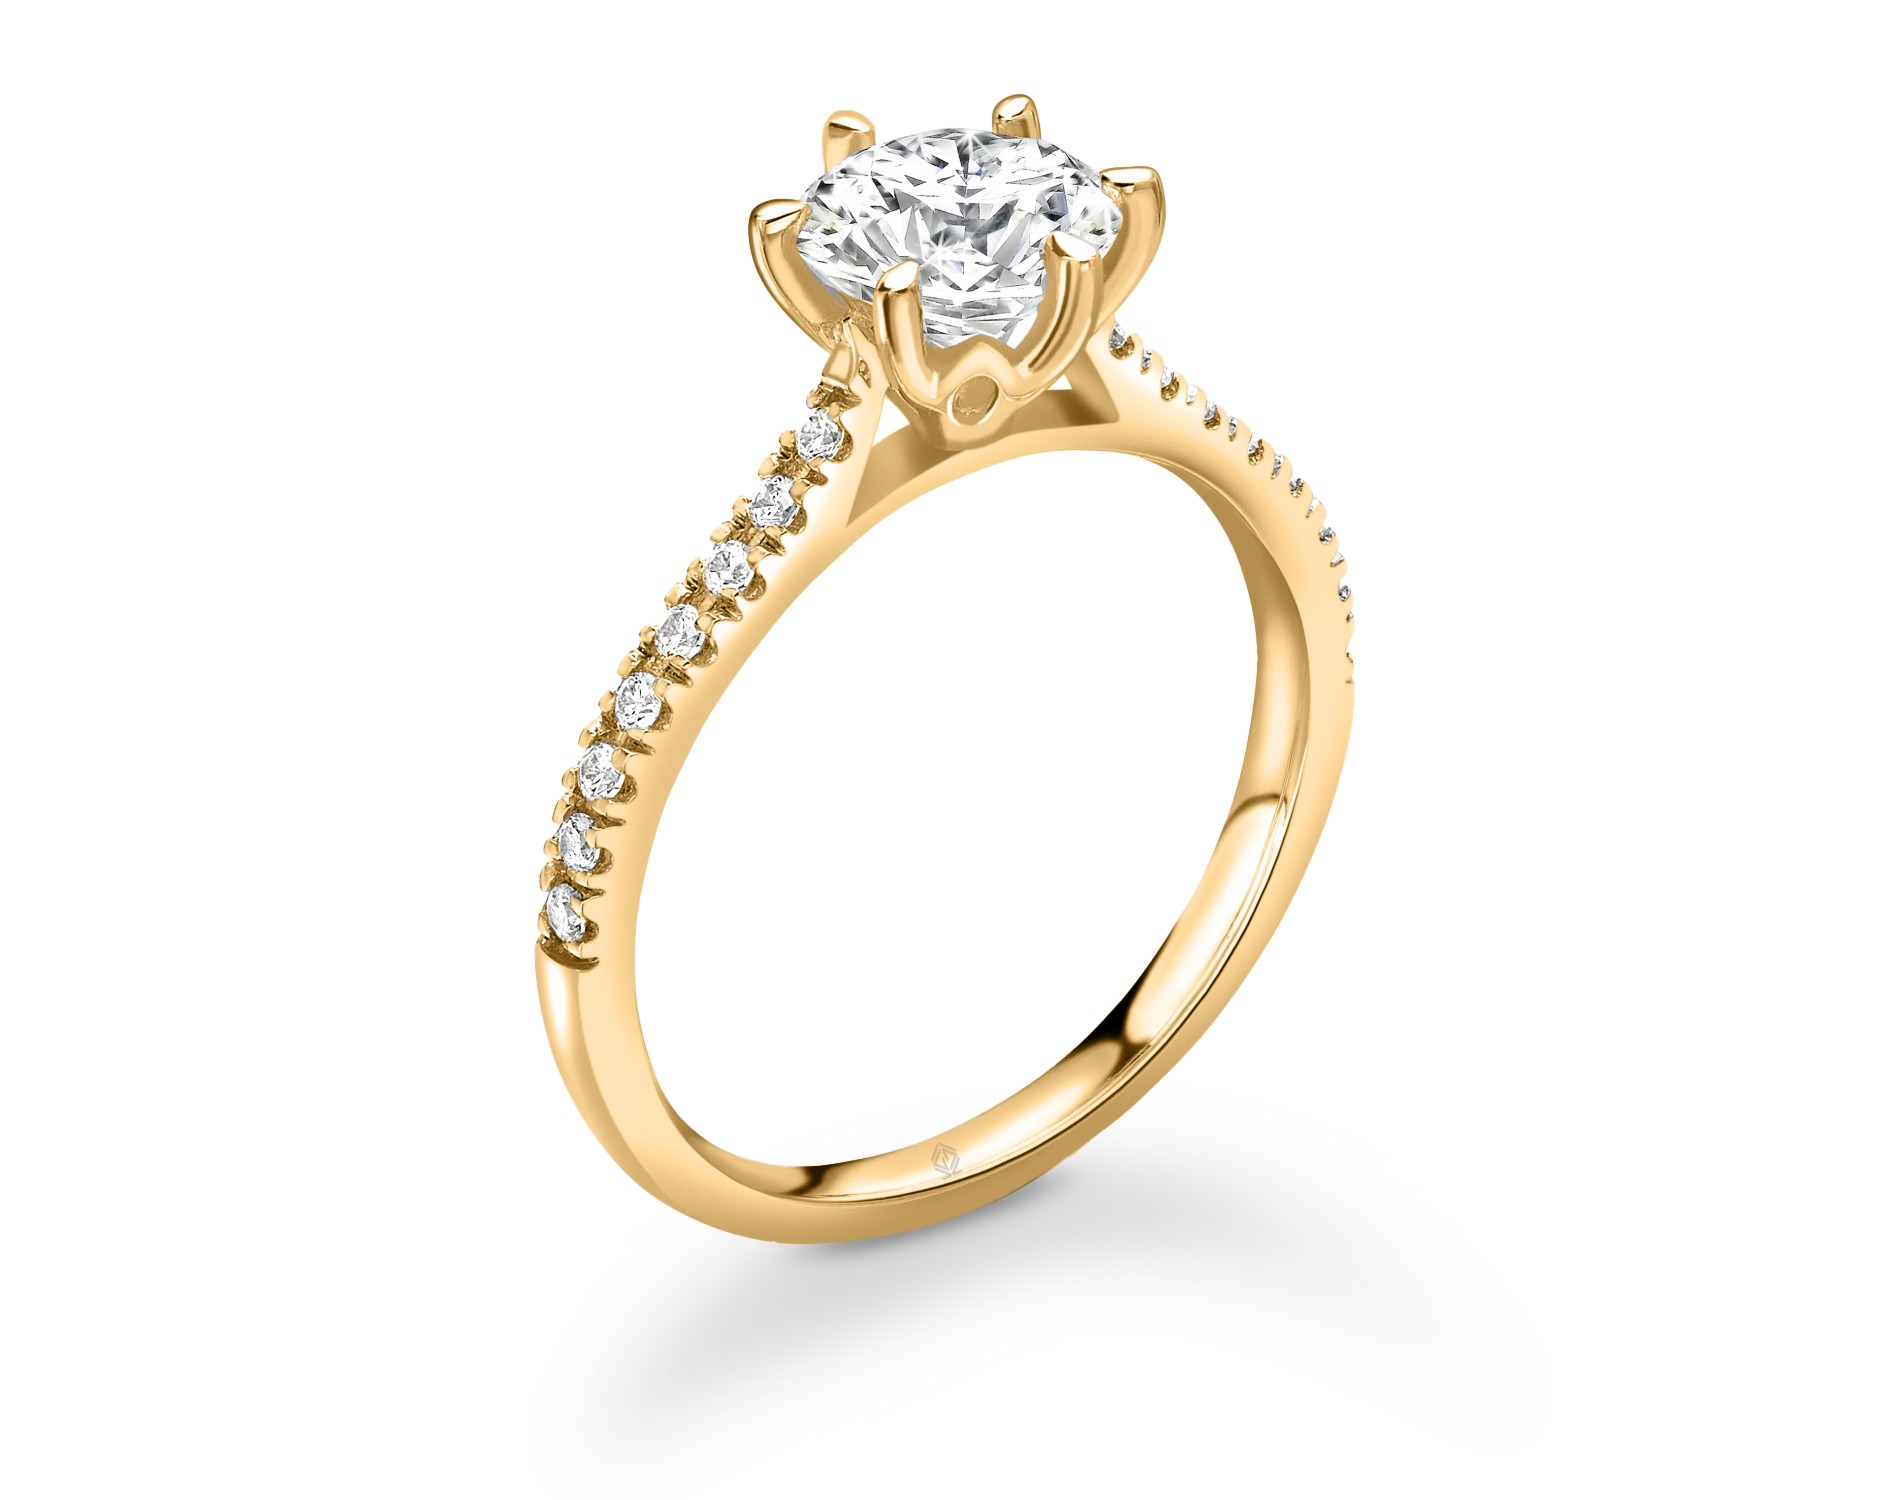 18K YELLOW GOLD ROUND CUT 6 PRONGS DIAMOND ENGAGEMENT RING WITH SIDE STONES PAVE SET